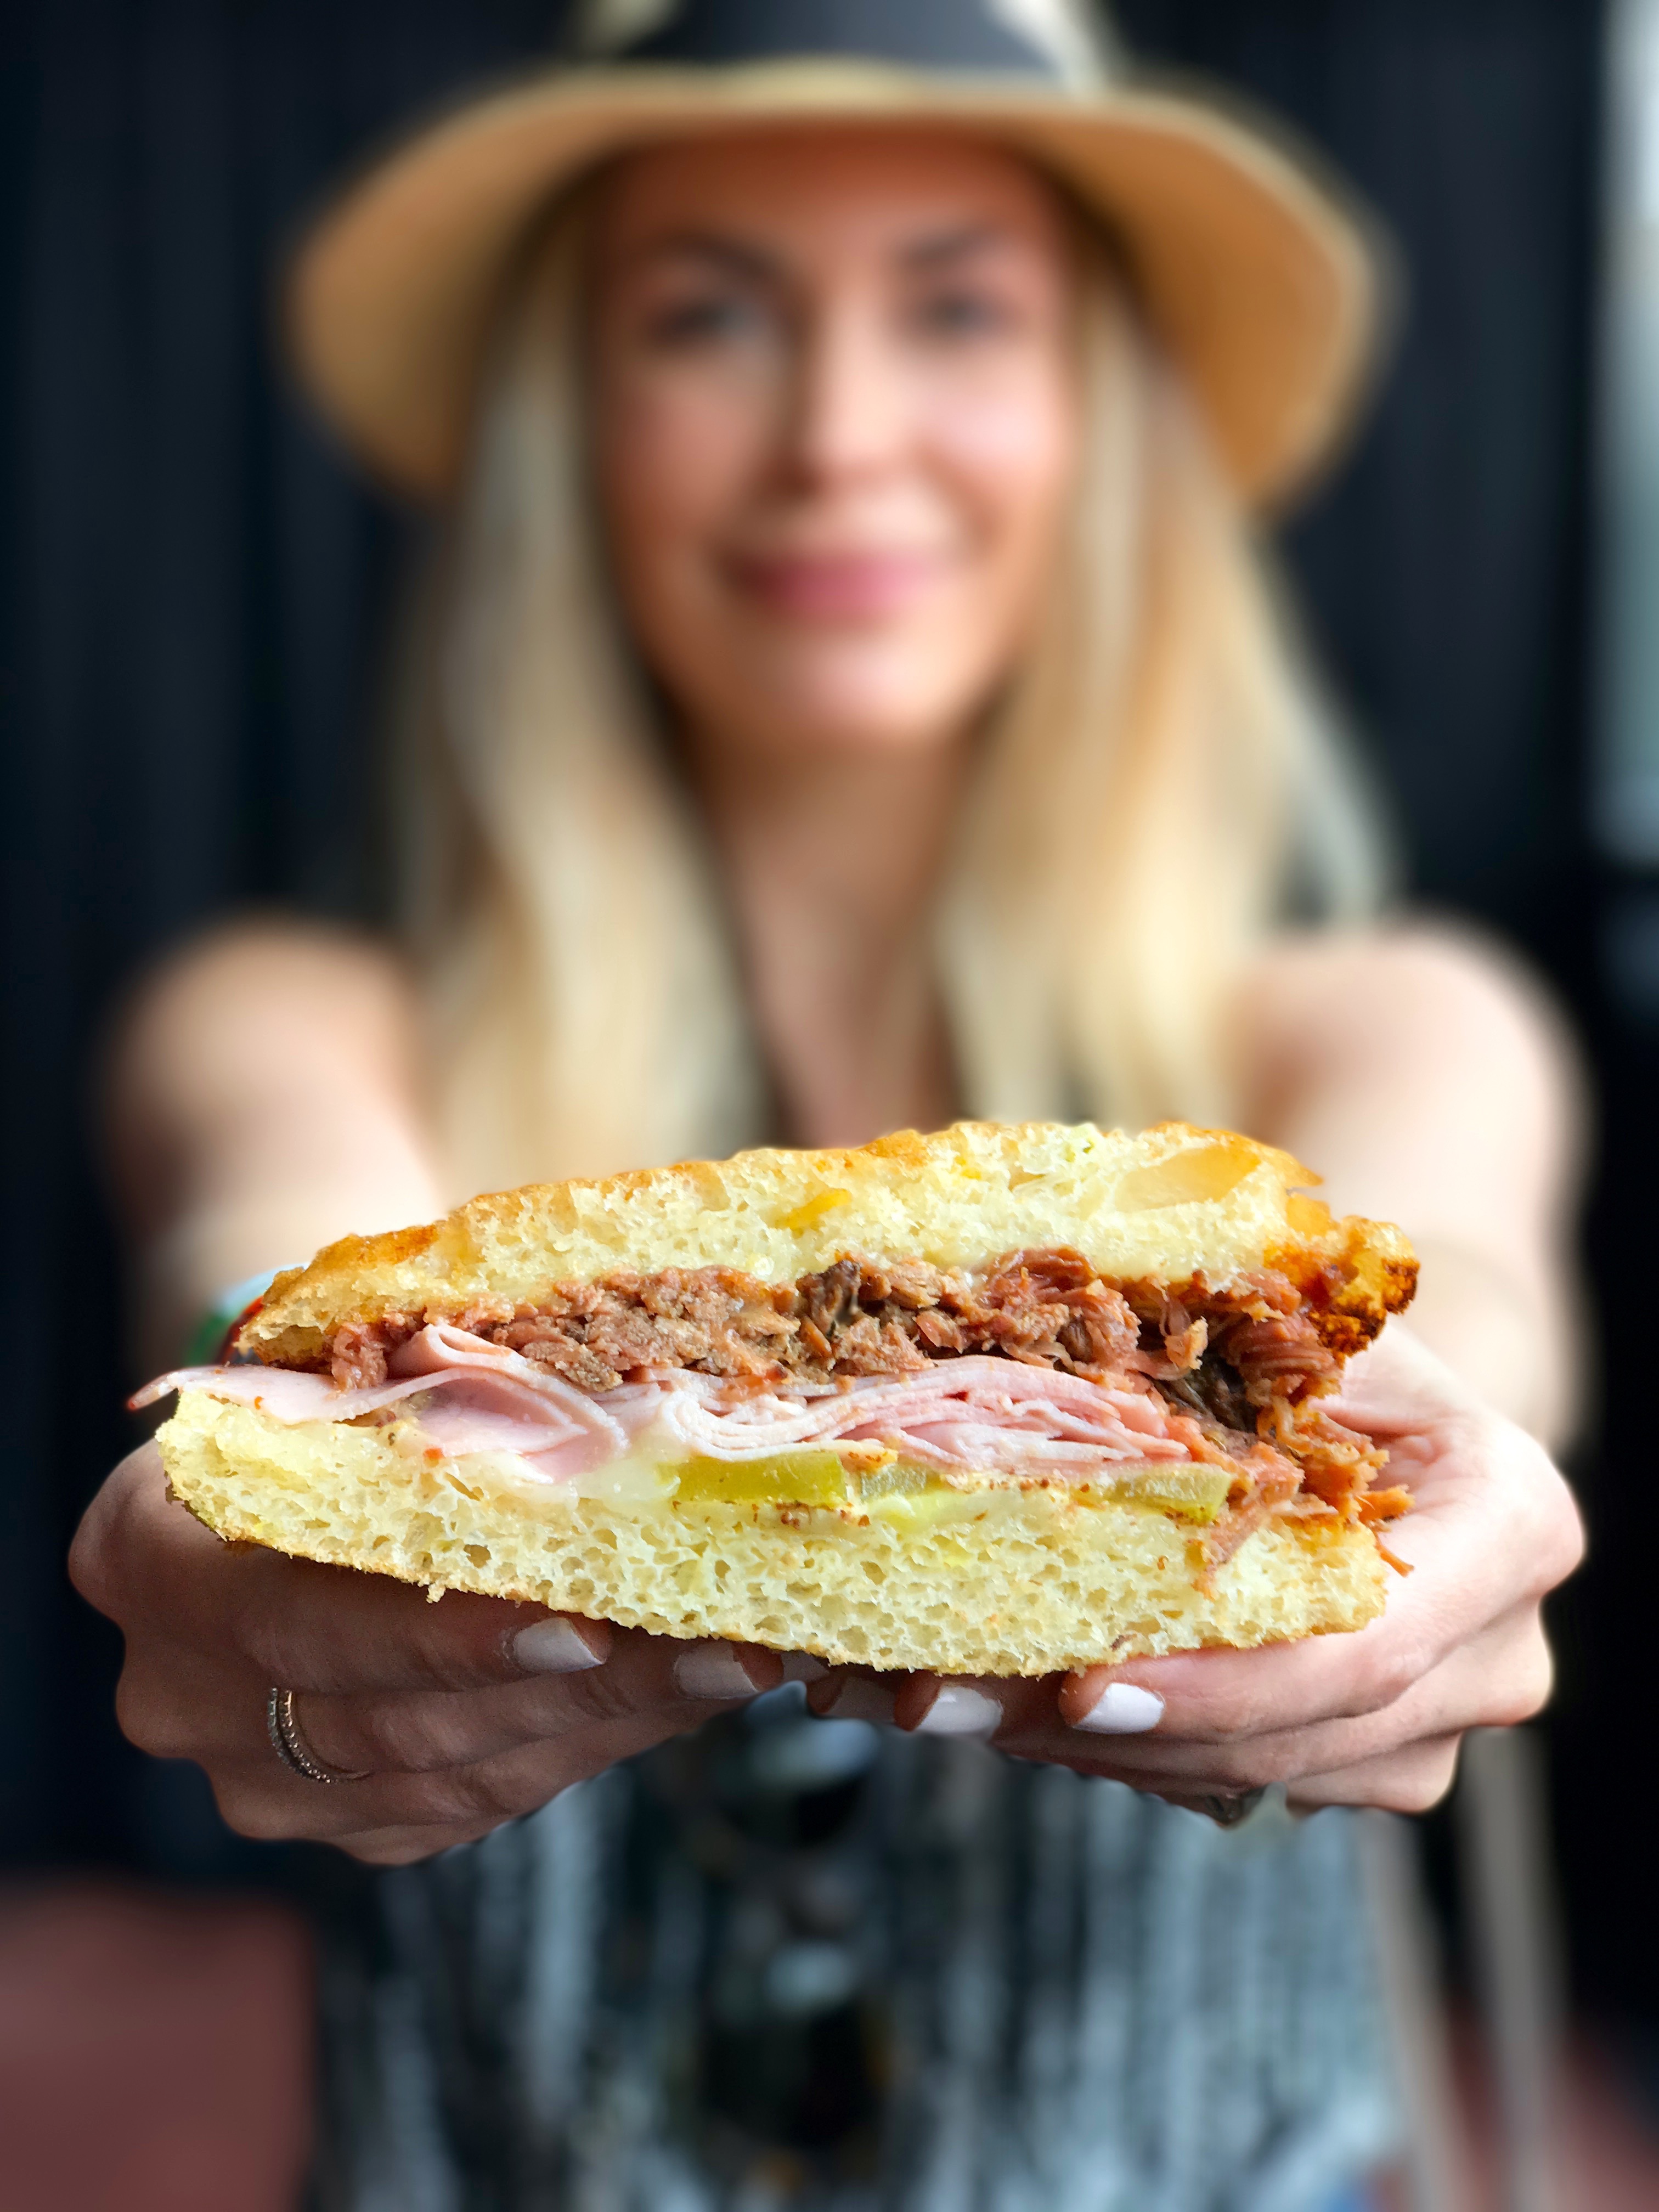 Schlotzsky’s Brisket Sandwiches | The Hungry Chronicles